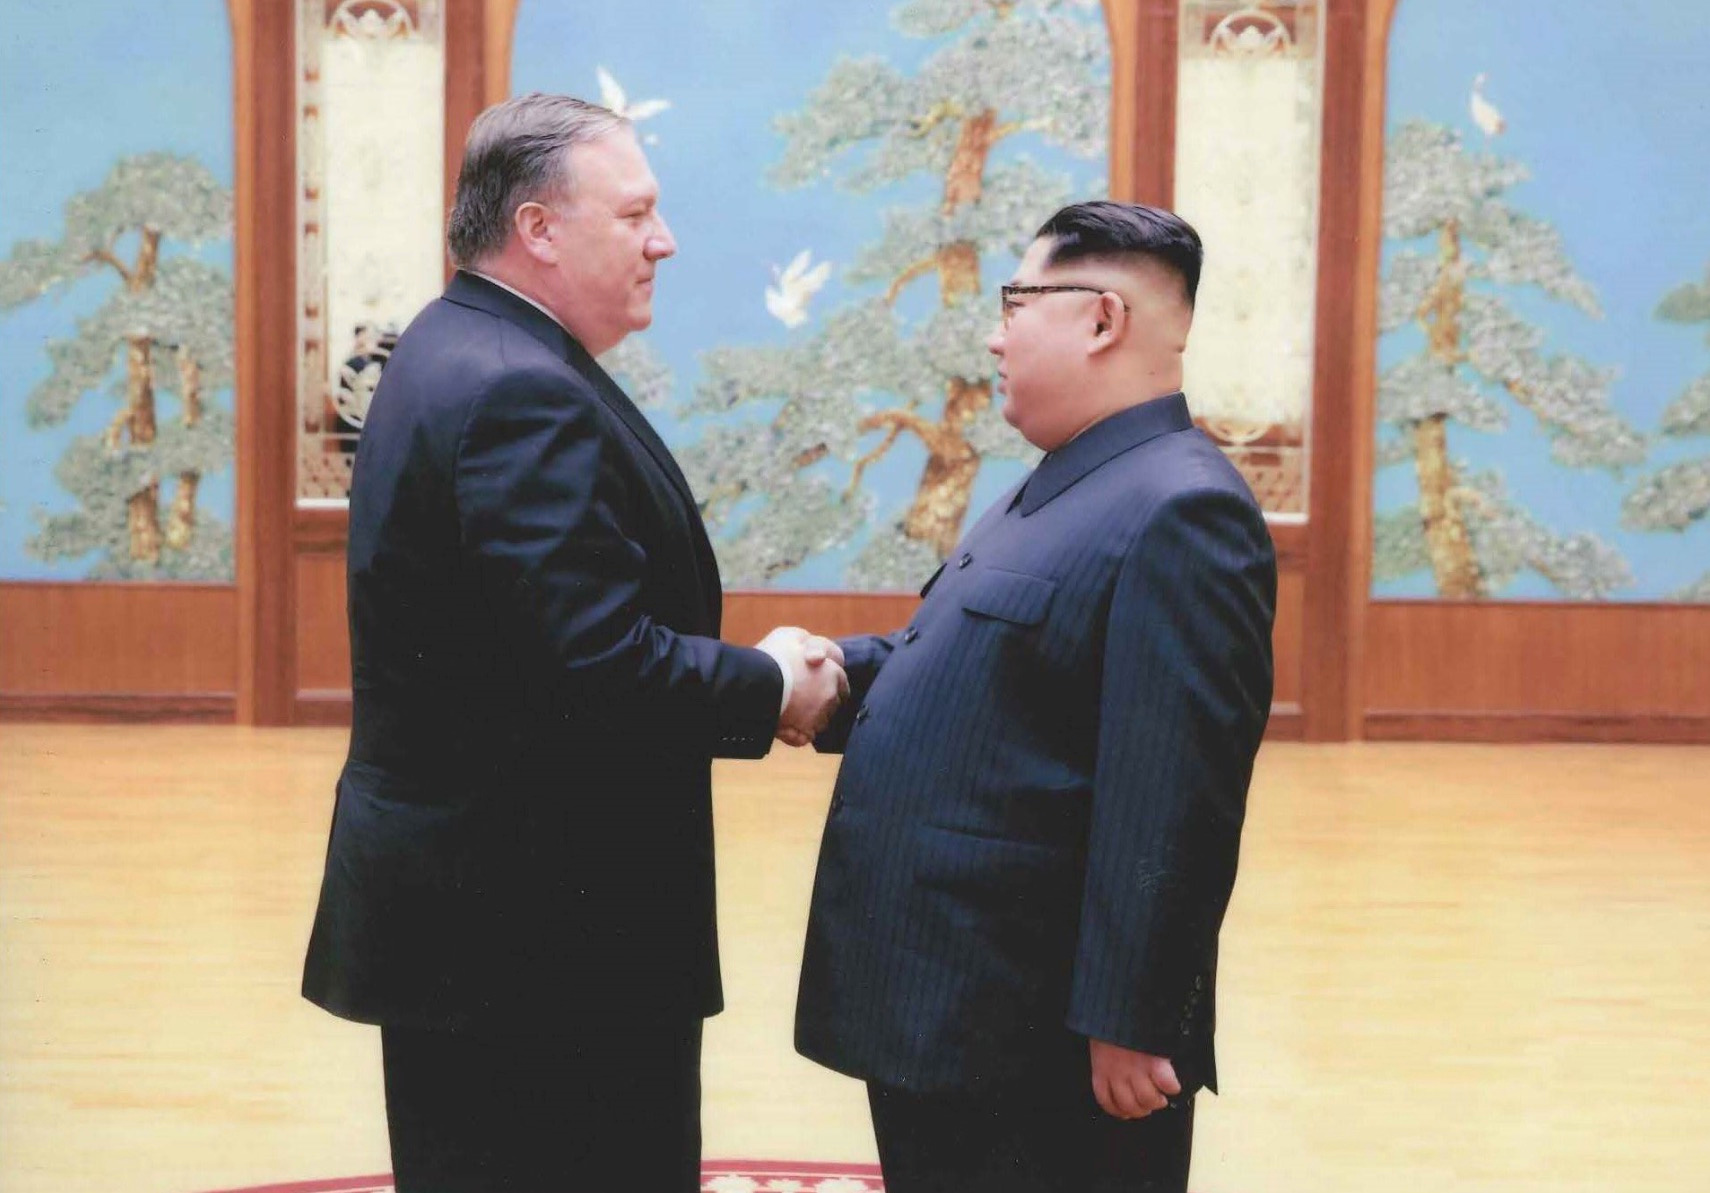 A U.S. government handout photo shows U.S. Central Intelligence (CIA) Director Mike Pompeo meeting with North Korean leader Kim Jong Un in Pyongyang, North Korea. (Handout/Reuters)